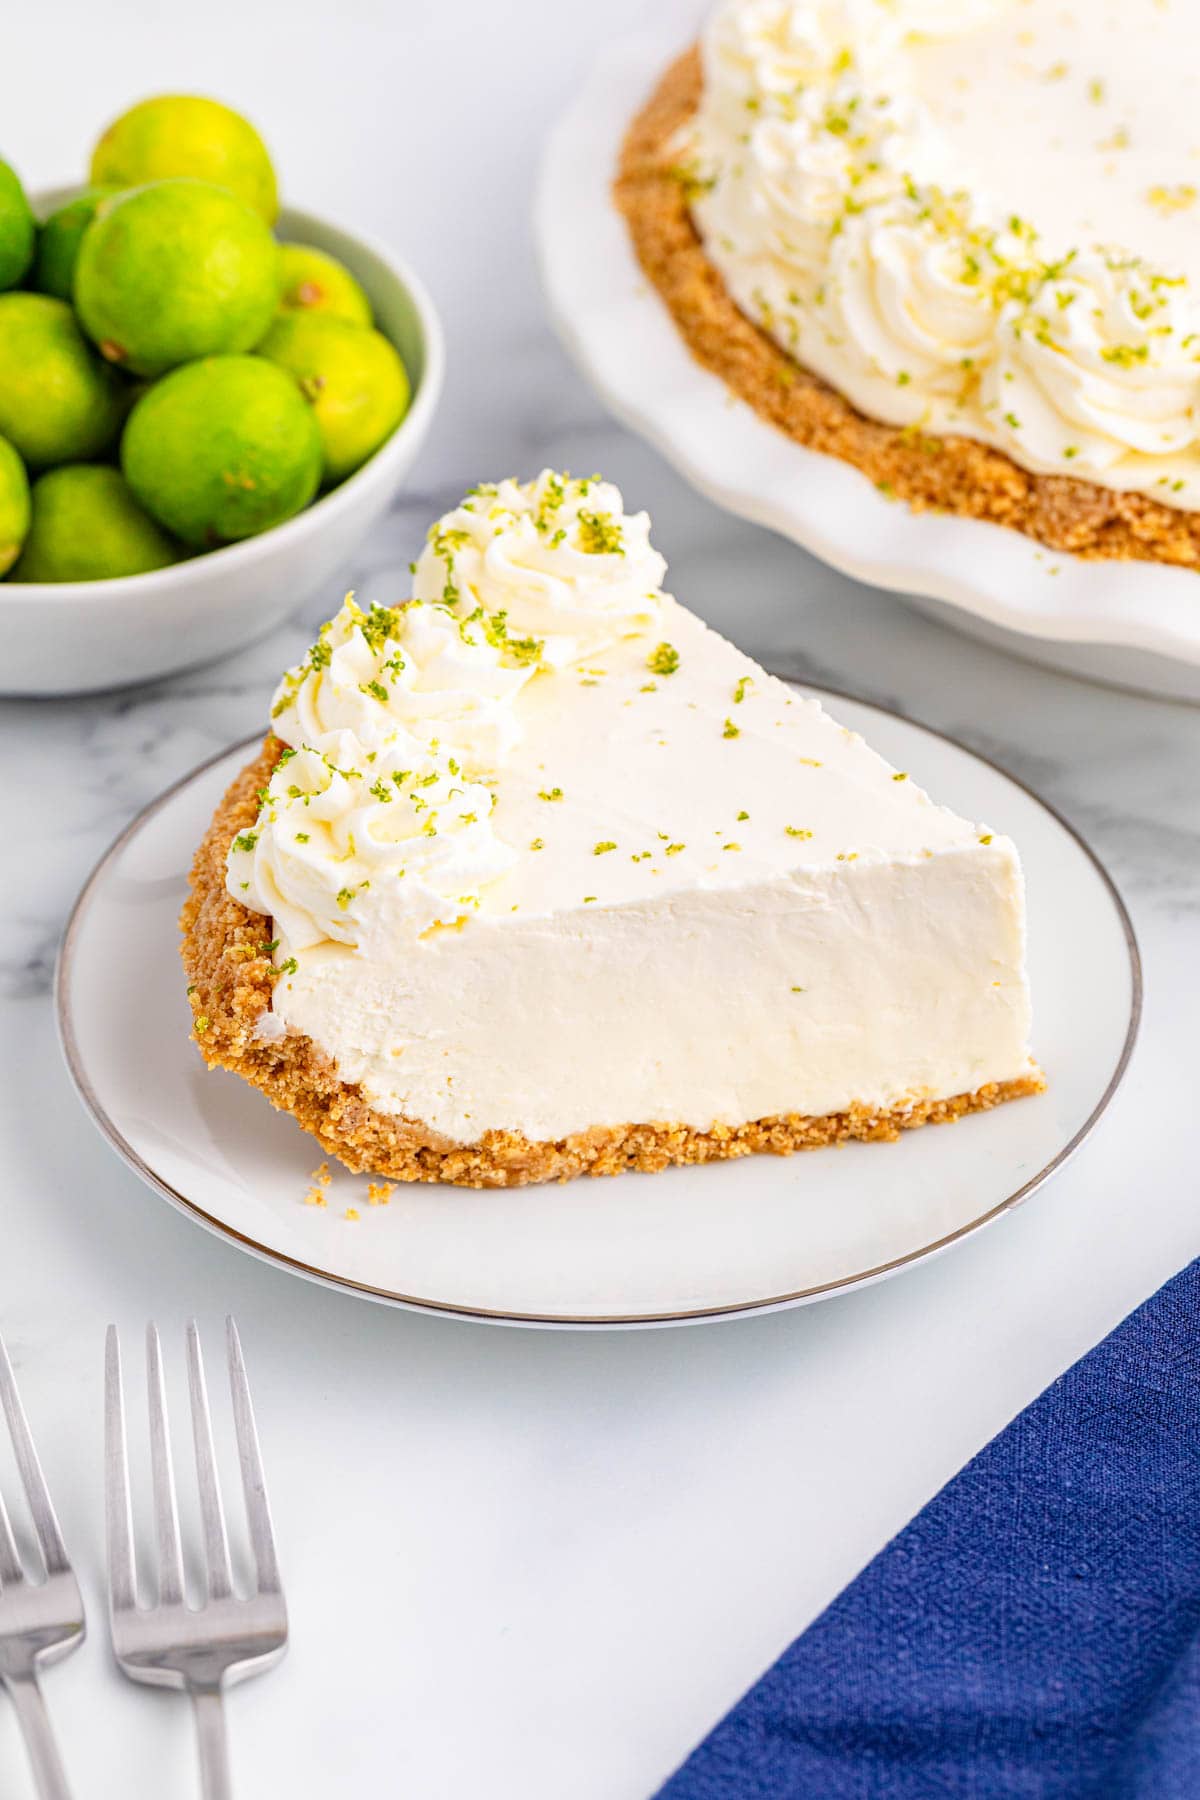 PIece of key lime pie on plate